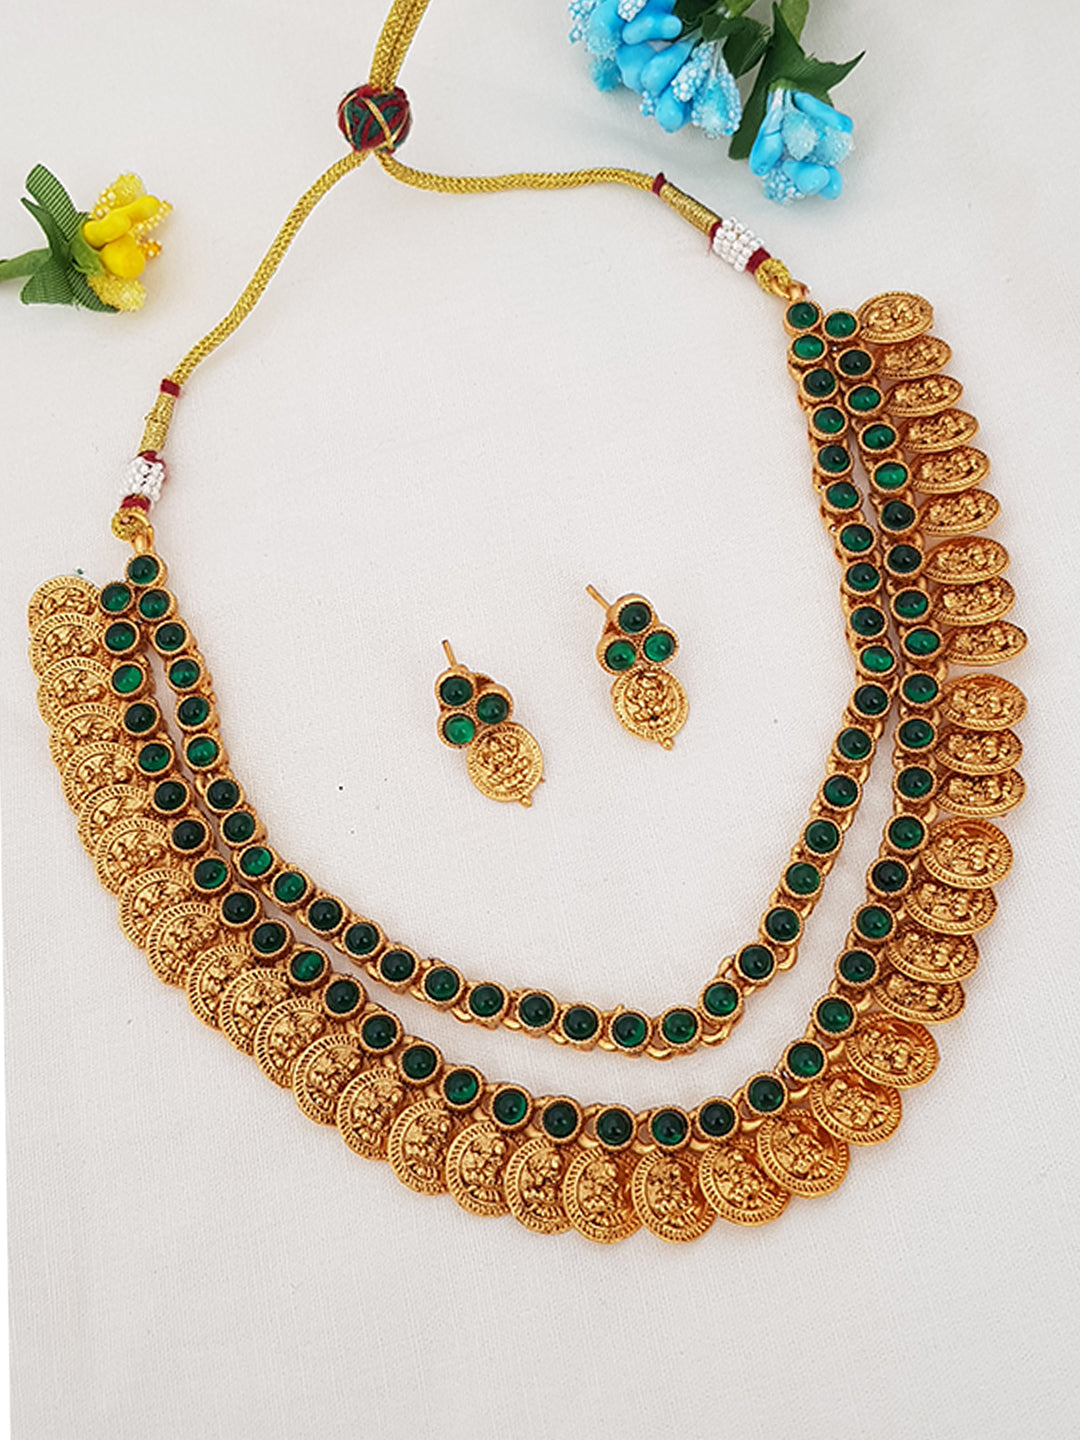 Gold Plated Exclusive bestseller Layered Grand Laxmi Necklace Set with colour options 9847N